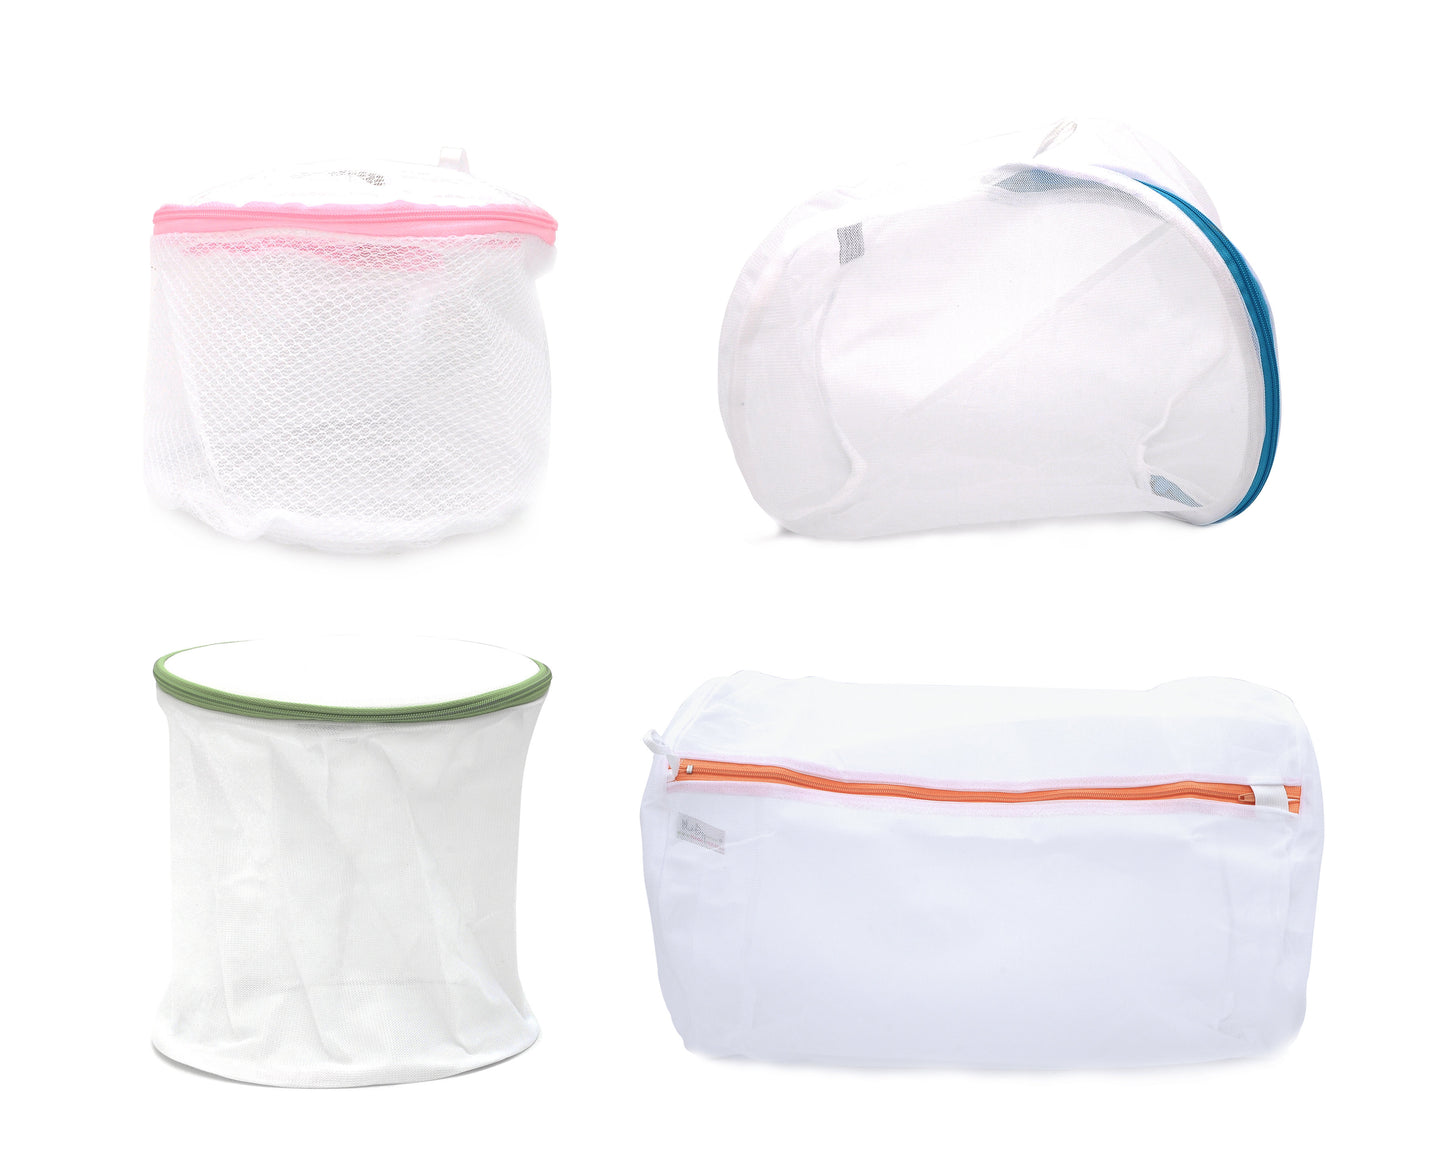 Laundry Zipper Mesh Washing Bags For Delicate Lingerie Socks Clothes Laundry